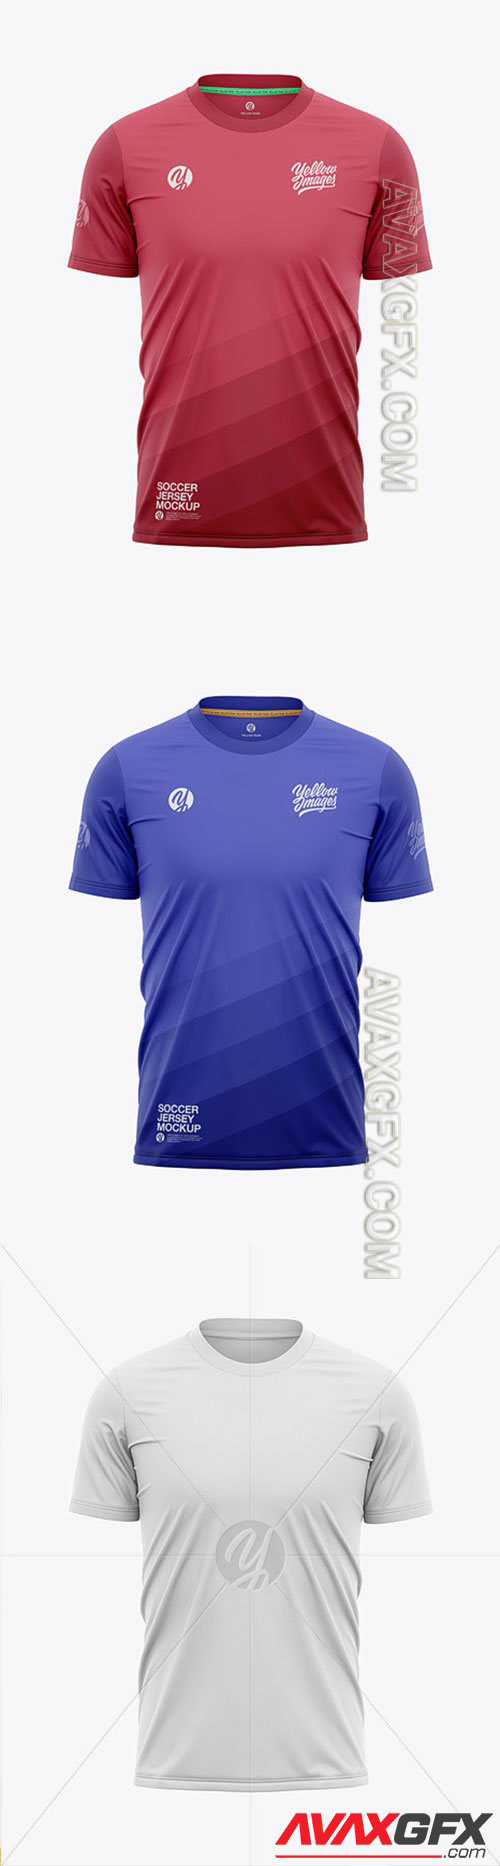 Download Men's Crew Neck Soccer Jersey Mockup - Front View 65256 » AVAXGFX - All Downloads that You Need ...